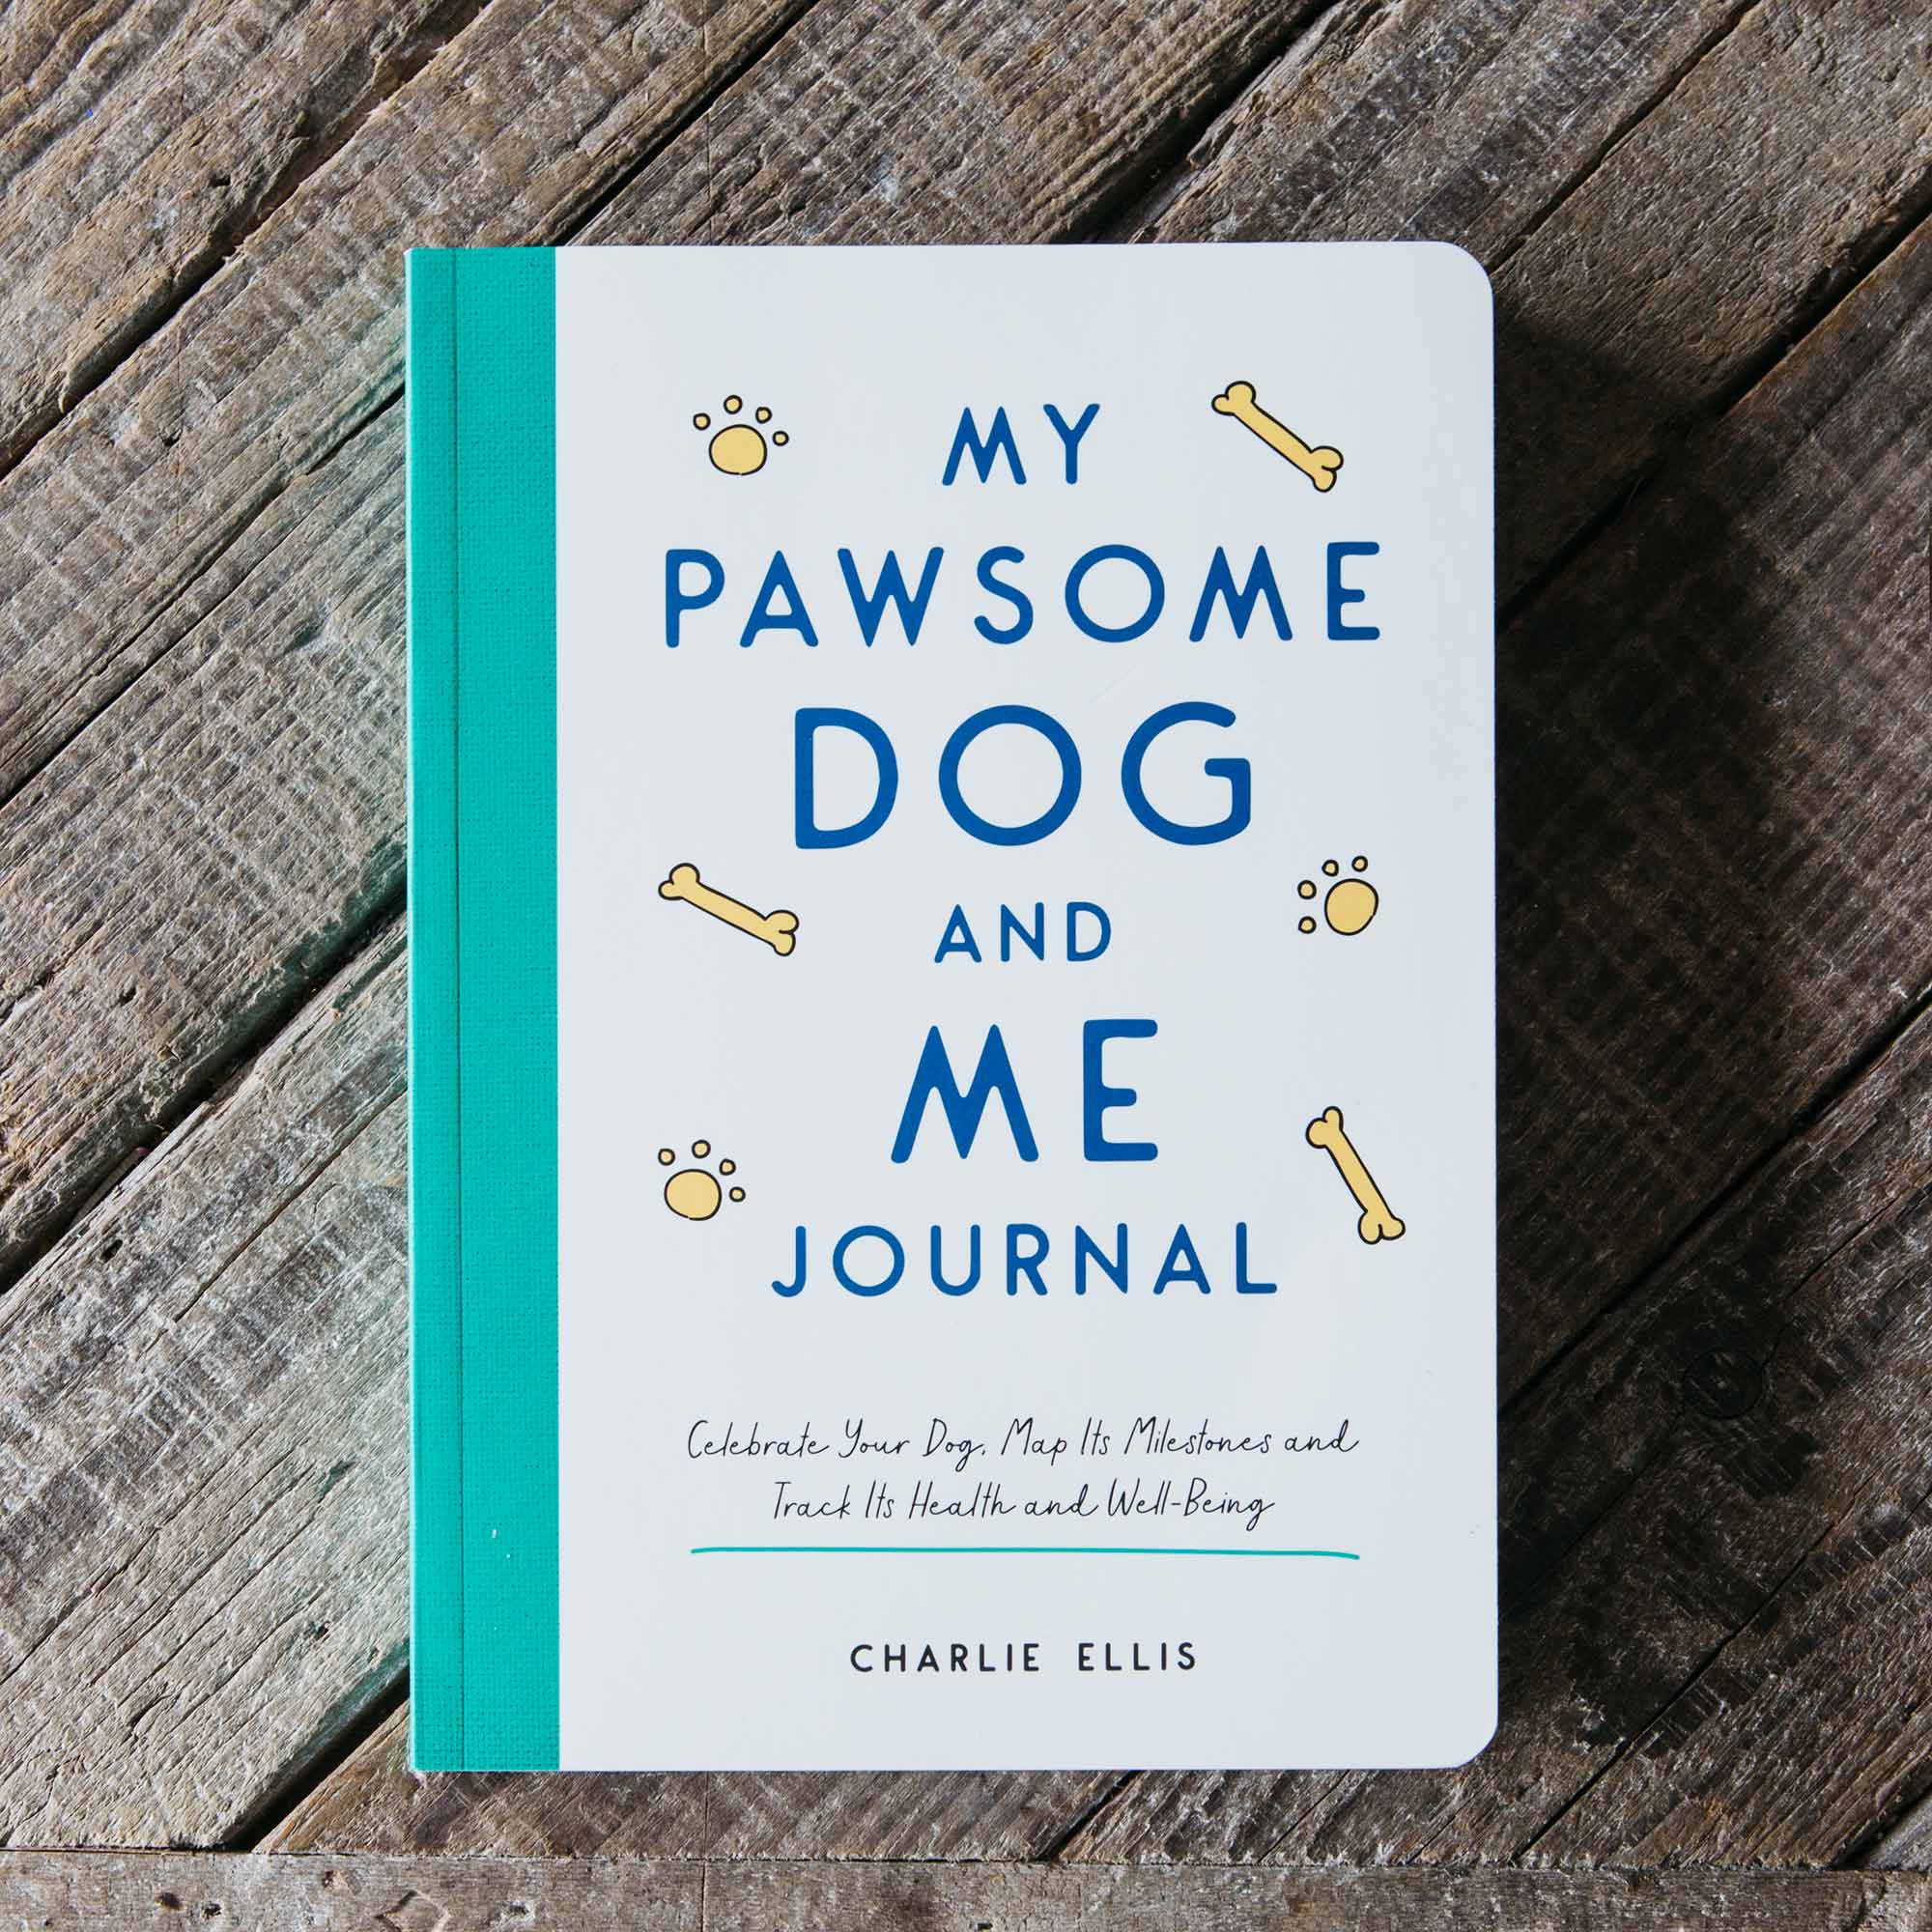 Read more about Graham and green my pawsome dog and me journal book